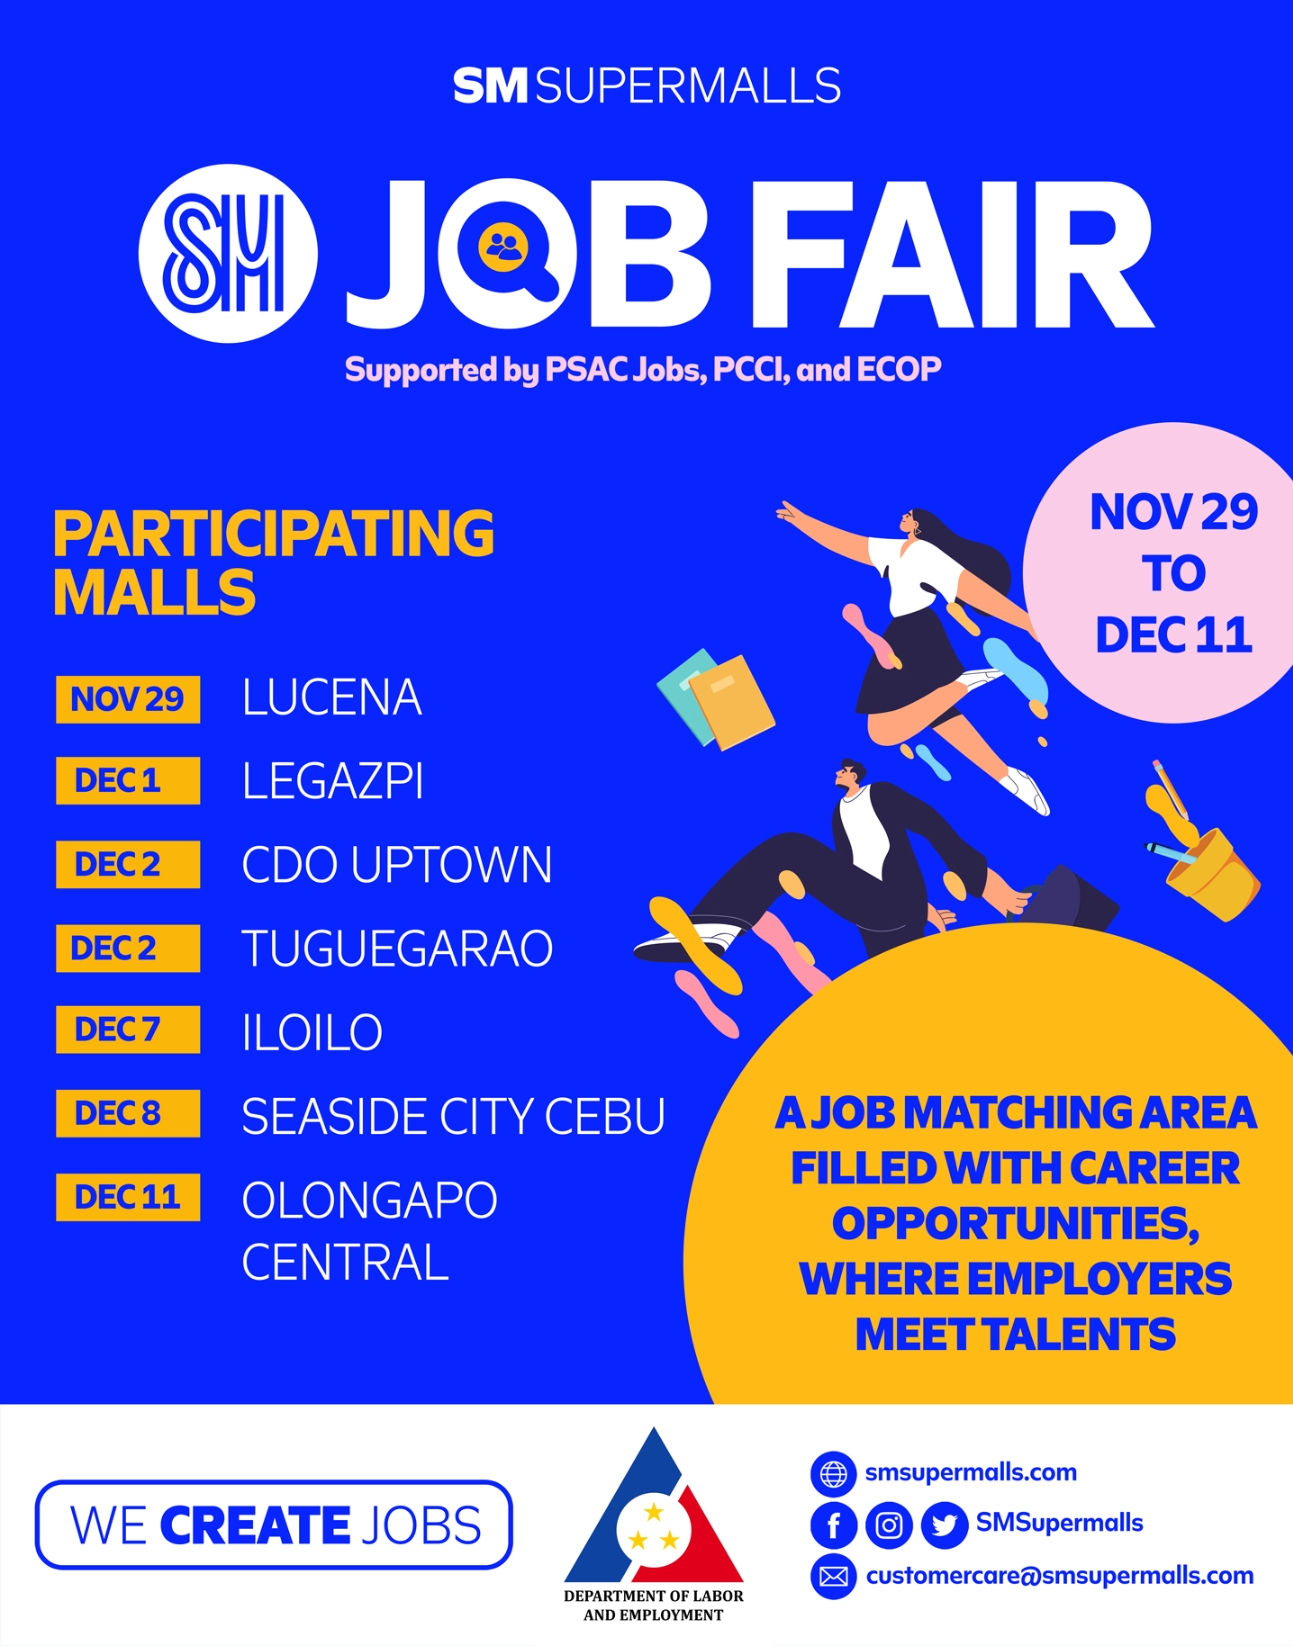 SM Supermalls to spearhead annual job fairs in select malls nationwide